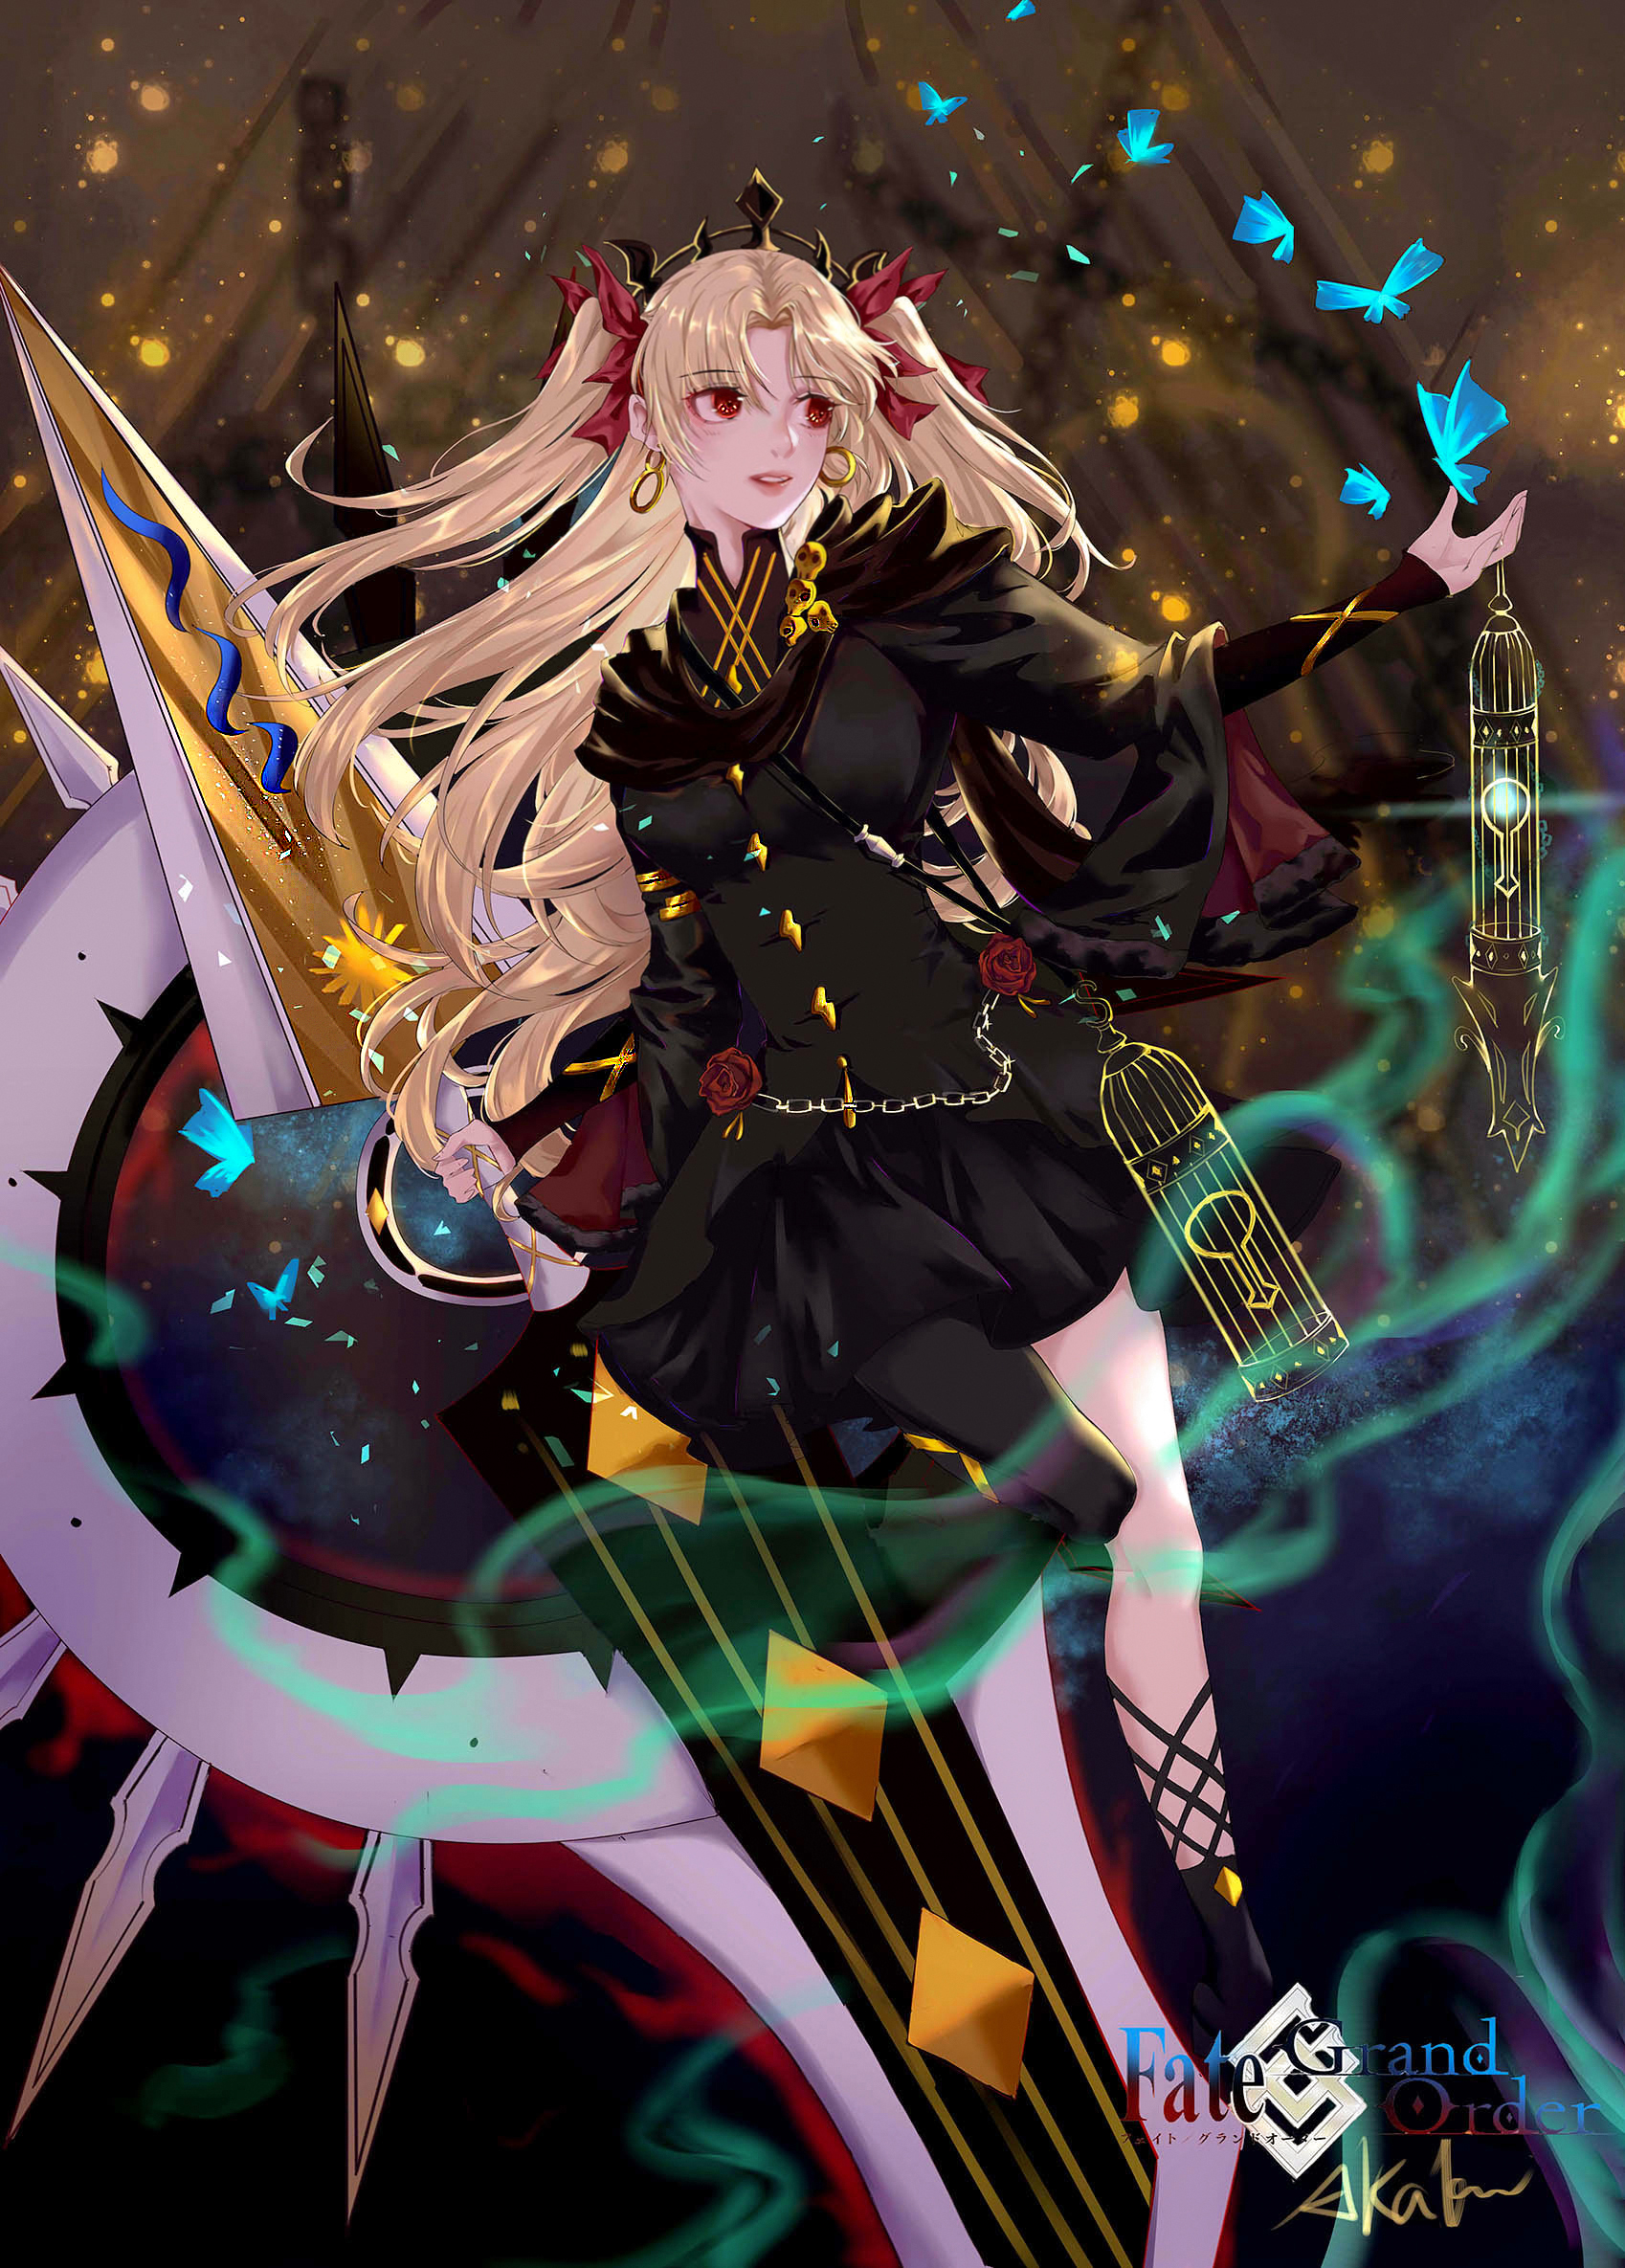 Anime Anime Girls Fate Series Fate Grand Order Ereshkigal Fate Grand Order  Twintails Long Hair Blond Wallpaper - Resolution:1698x2370 - ID:1317737 -  